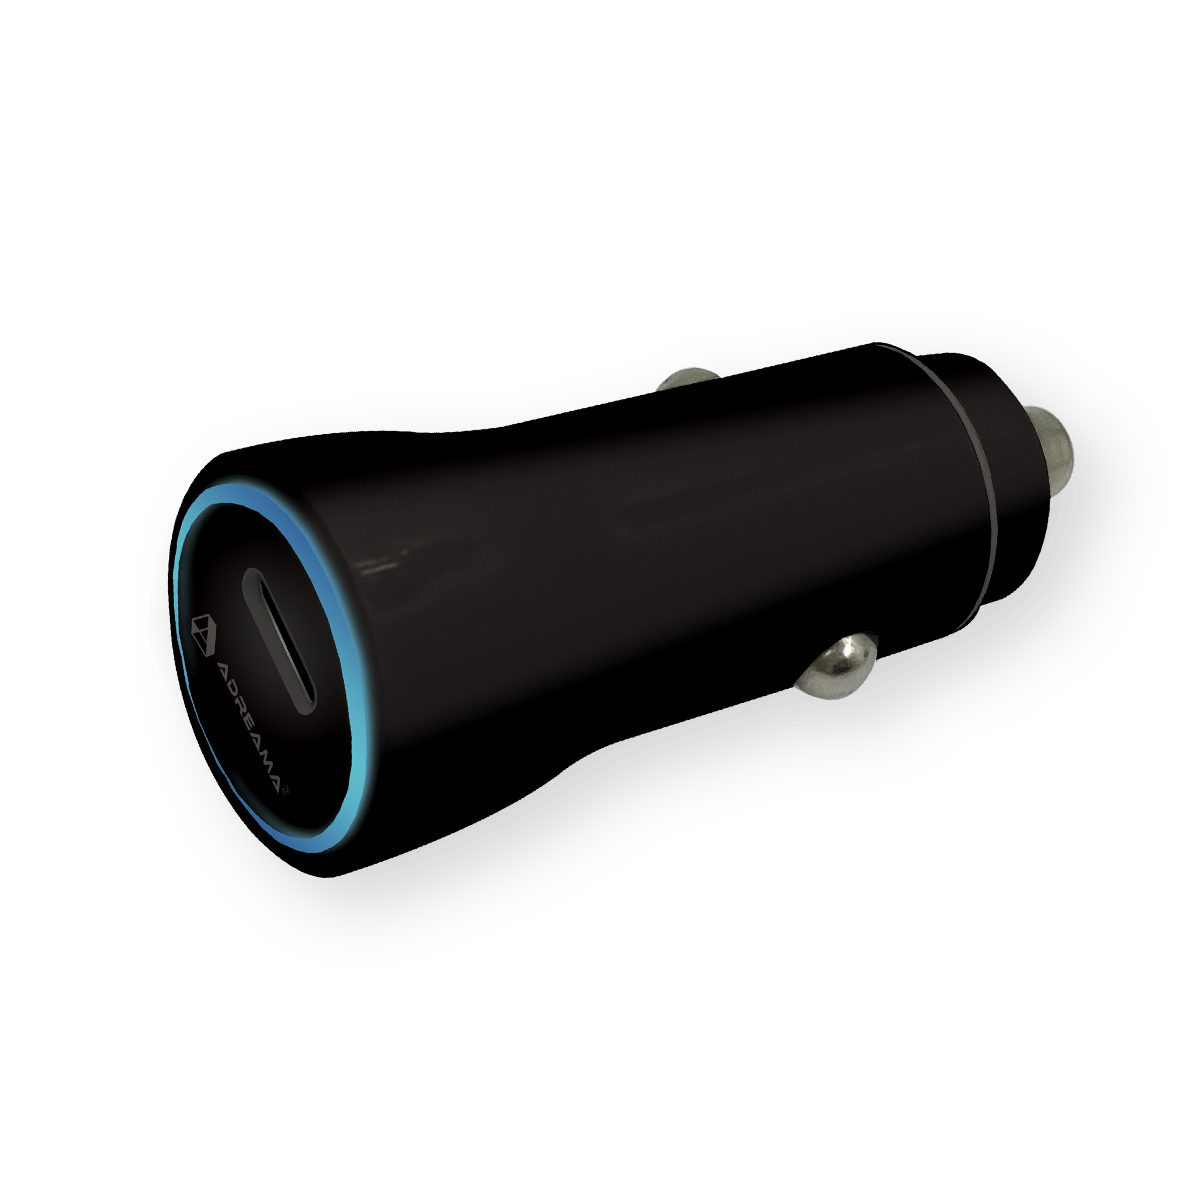 PD 20W Car Charger with USB-C Port and Charging Indicator LED Light, Black, Angle View.